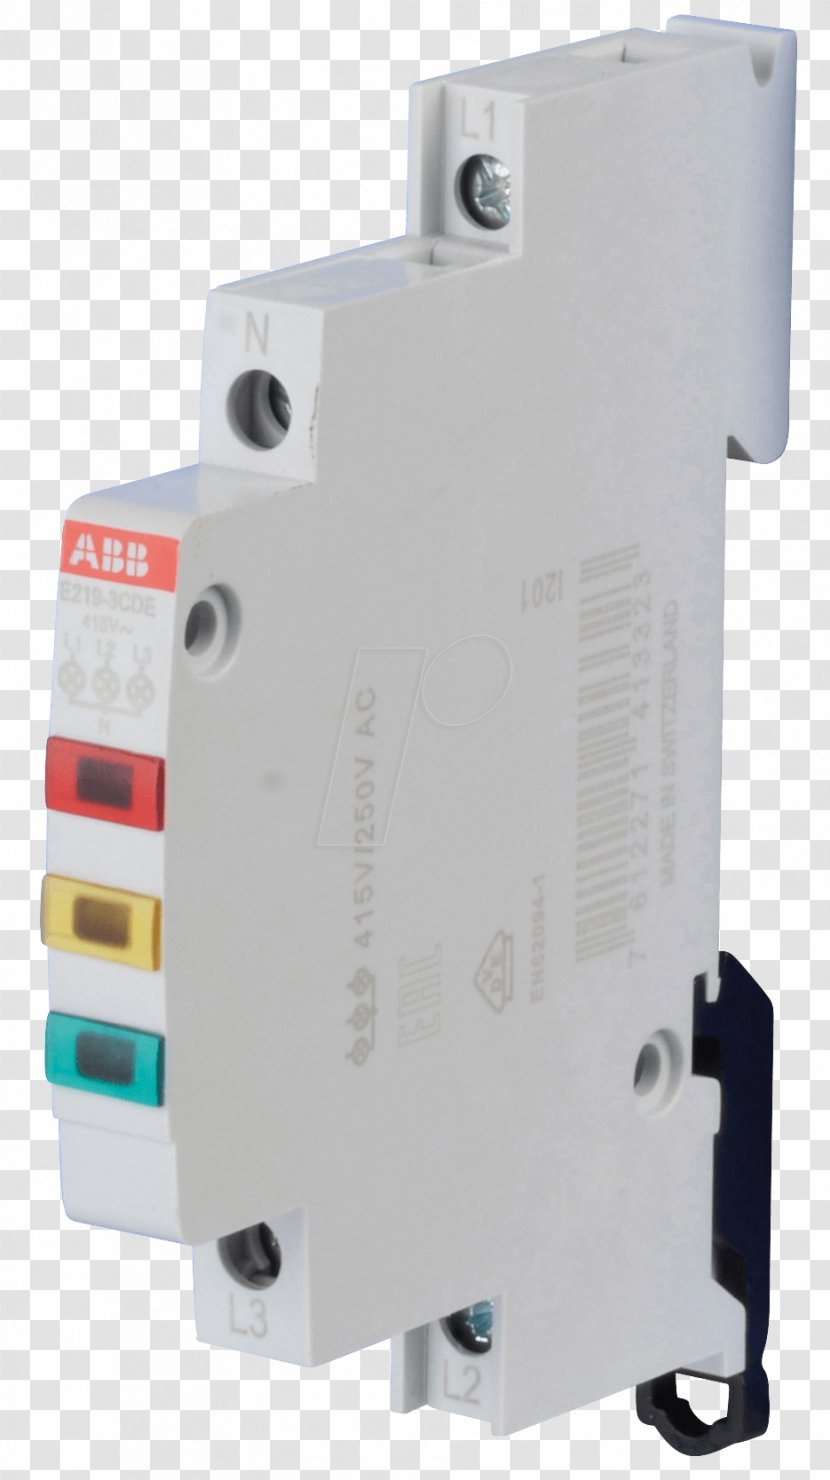 ABB Indicator Light For Distribution Board E219-3 Group Electrical Switches DIN Rail - Electricity - Electric Potential Difference Transparent PNG